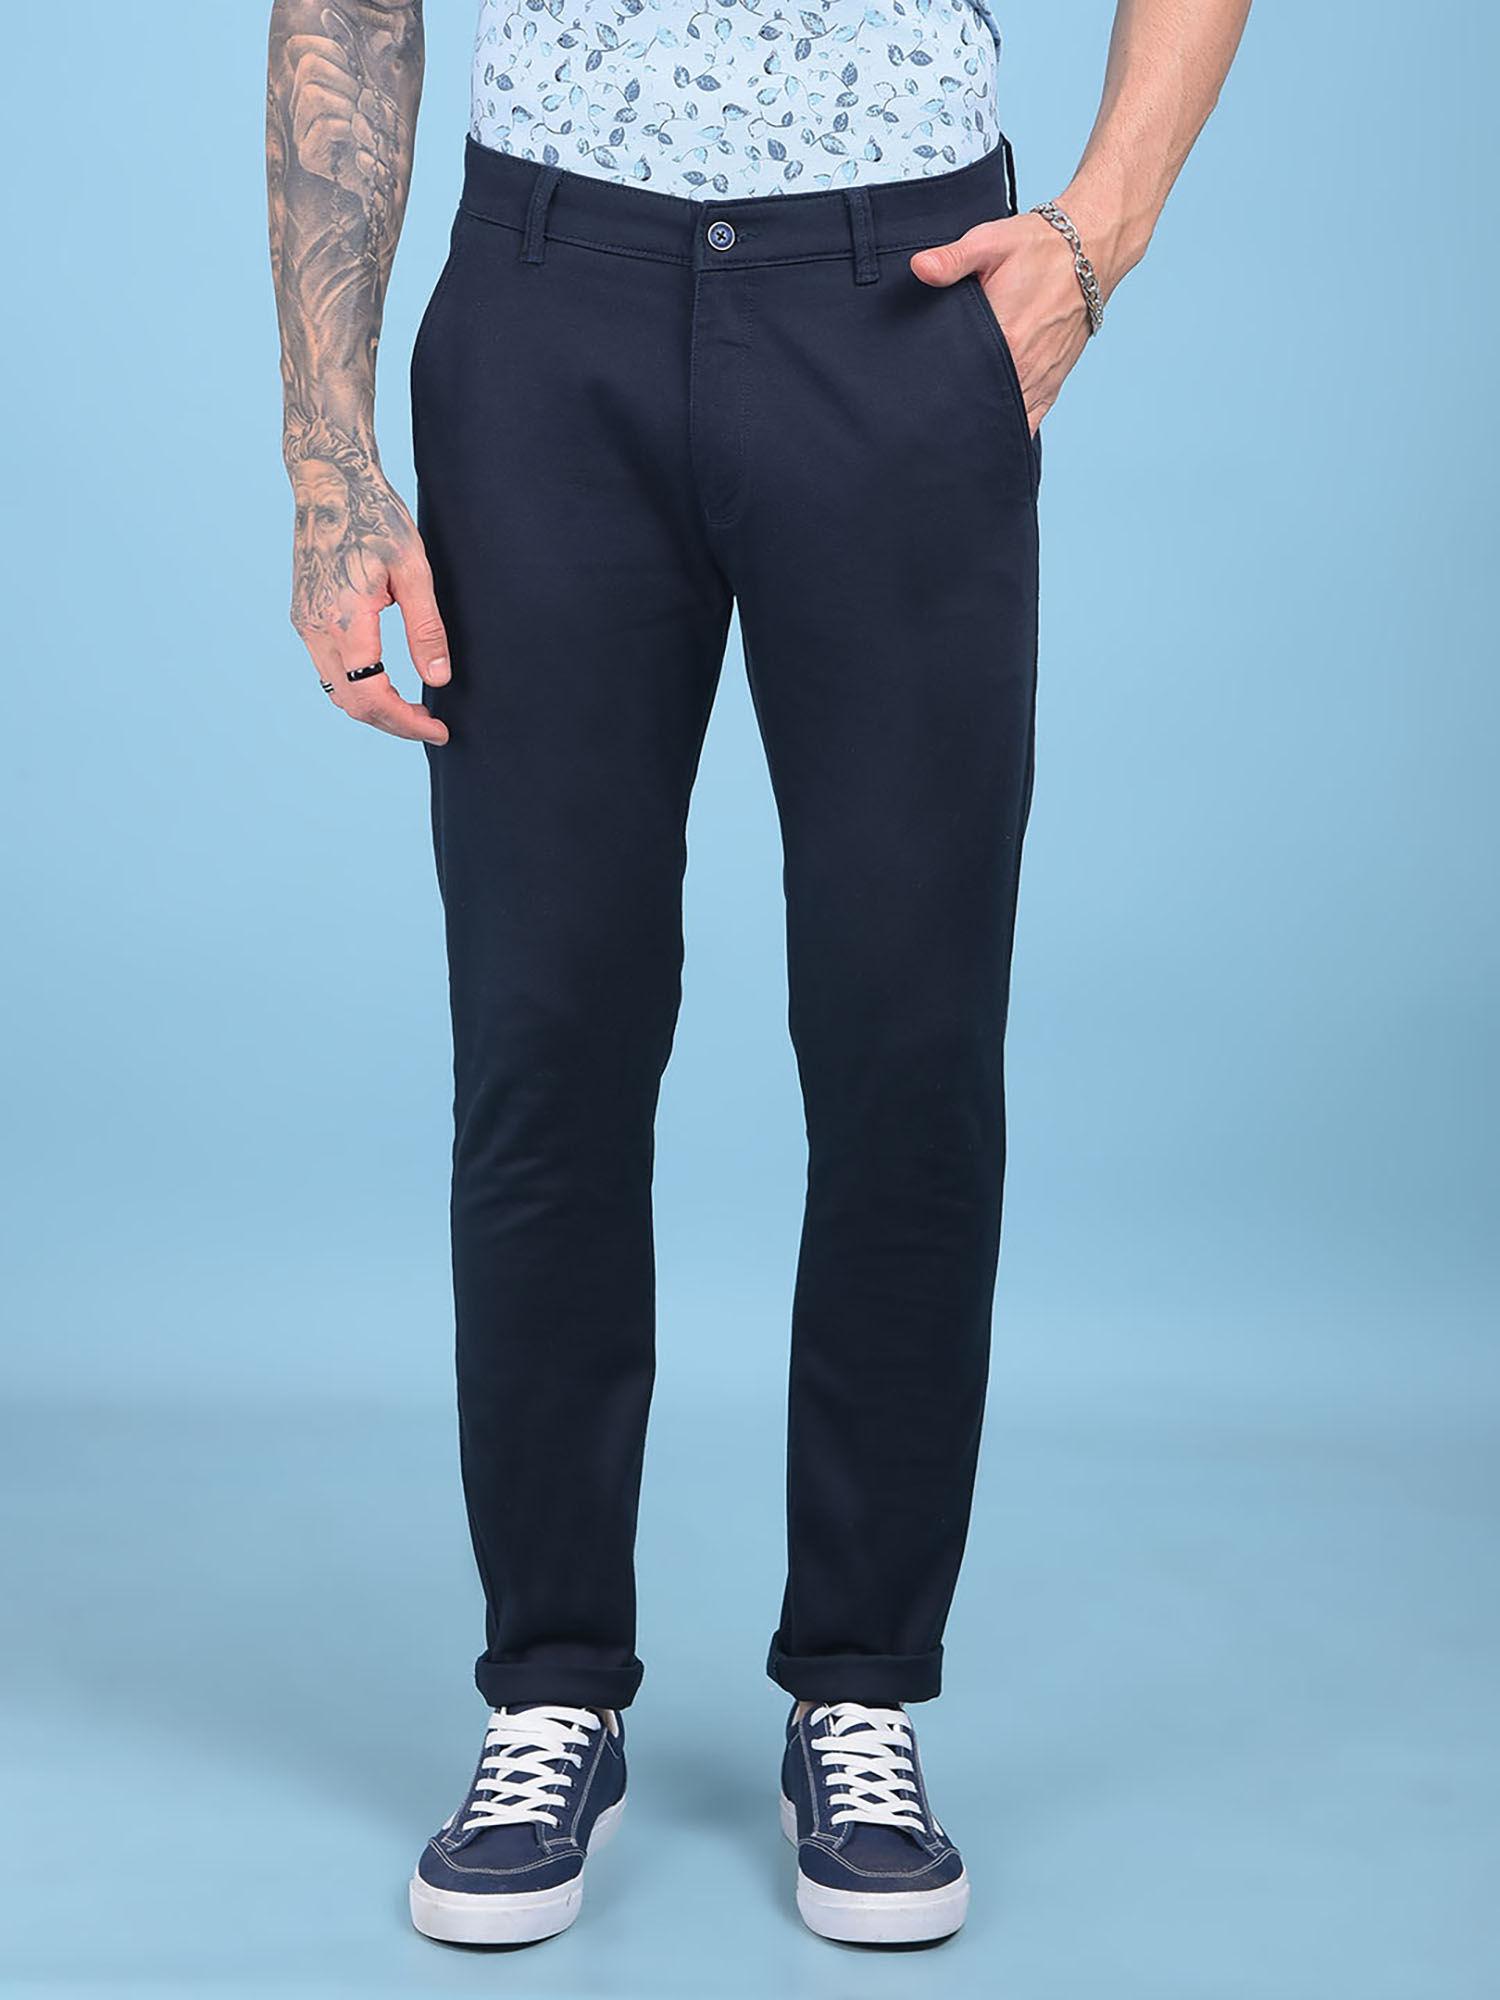 mens navy blue stretchable trousers